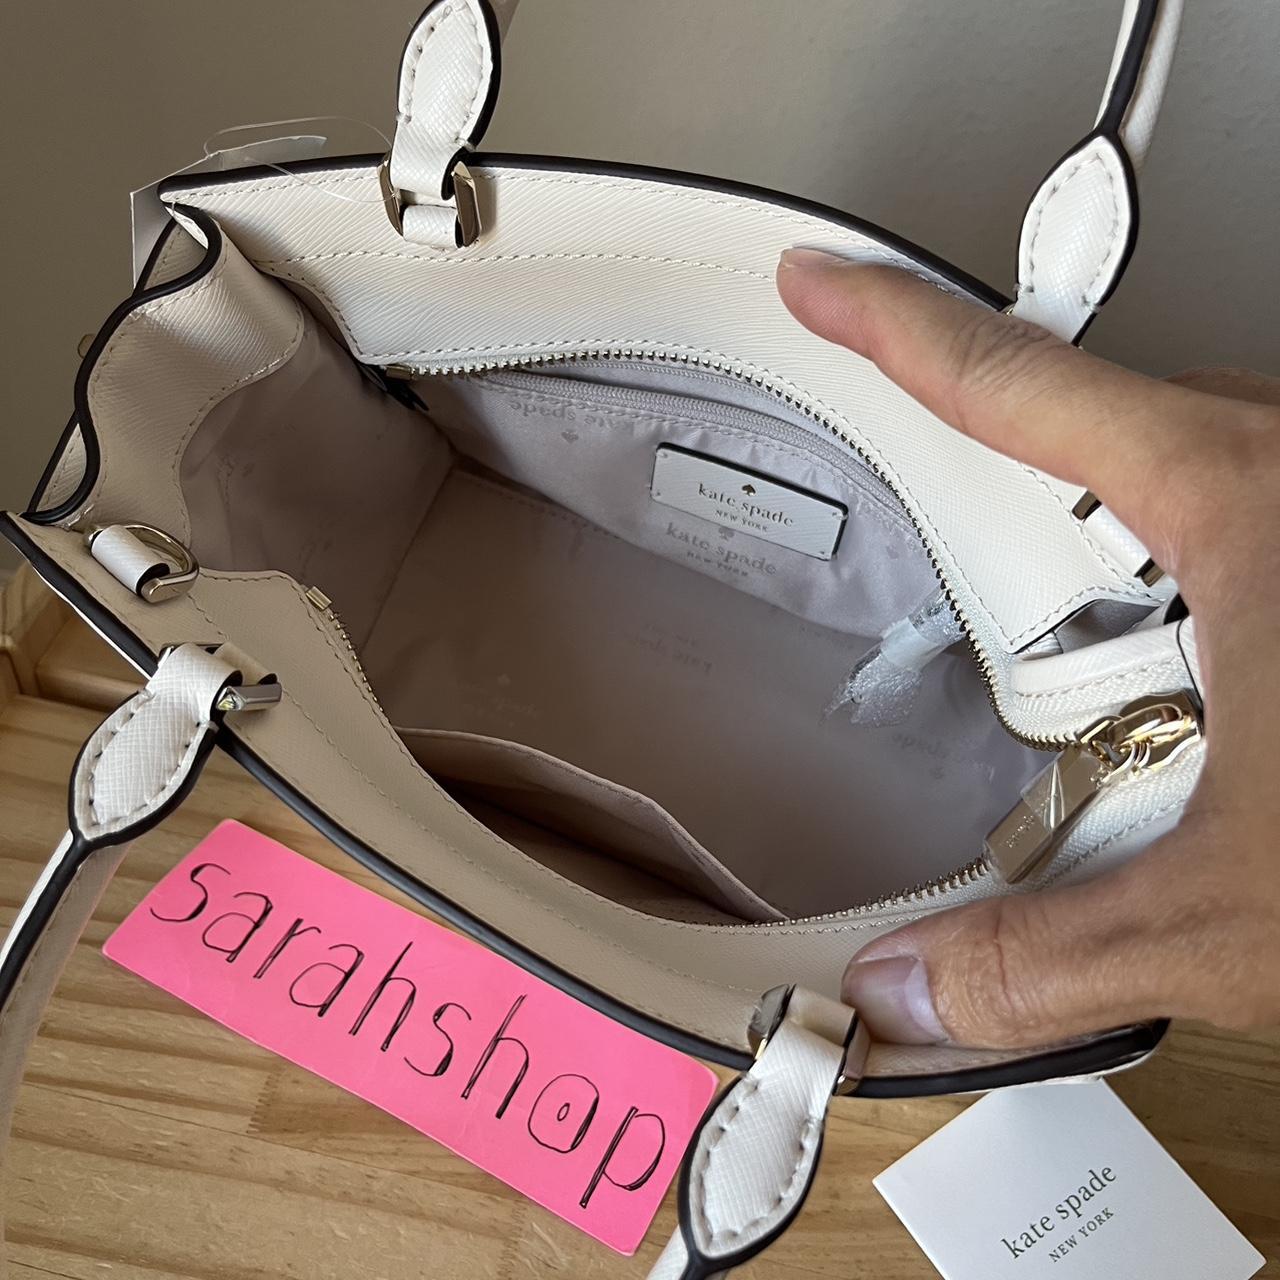 Brand New with Tag Kate Spade Staci Colorblock - Depop